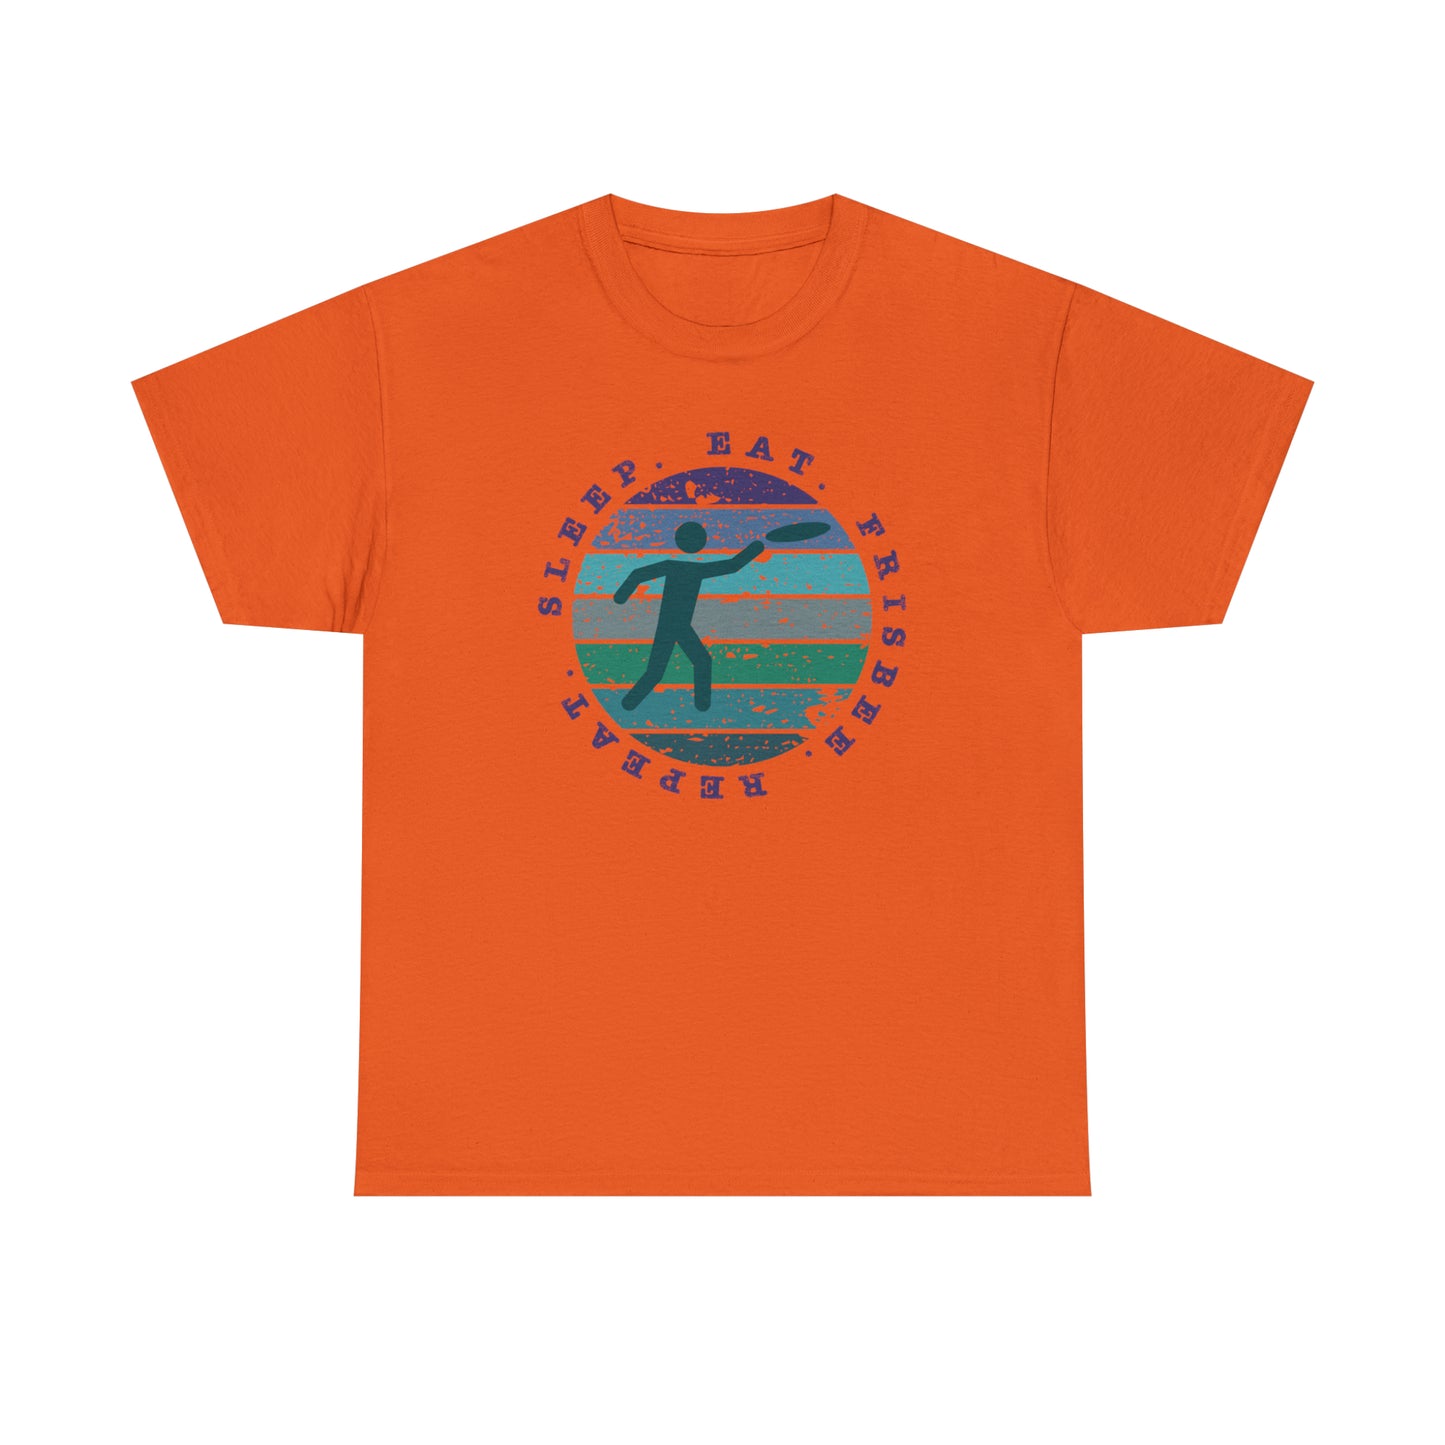 Frisbee T-Shirt For Frisbee Sport TShirt For Ultimate Frisbee T Shirt For Disc Golf Tee For Frisbee Player Gift